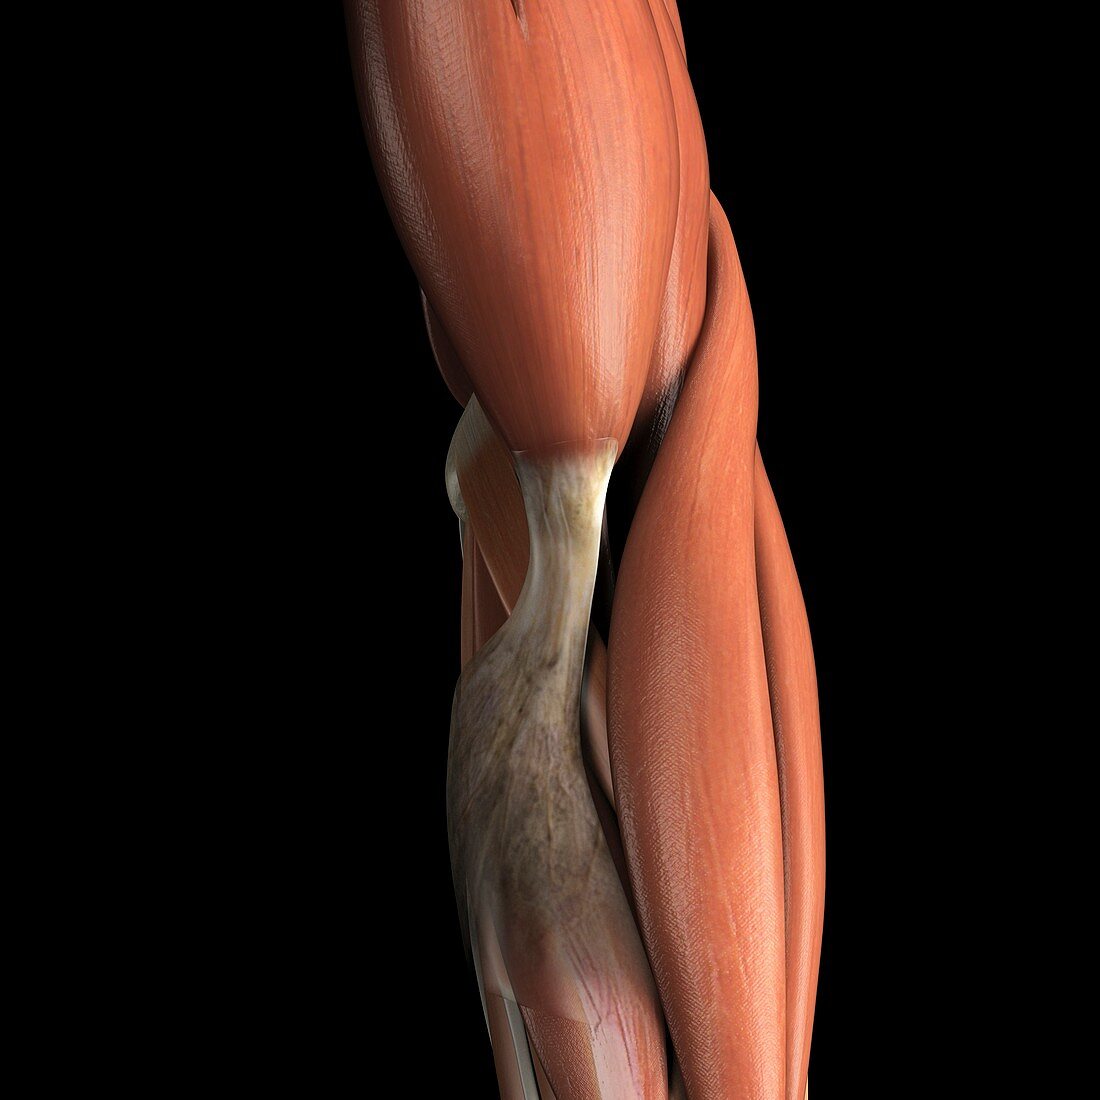 The Muscles of the Forearm and Elbow